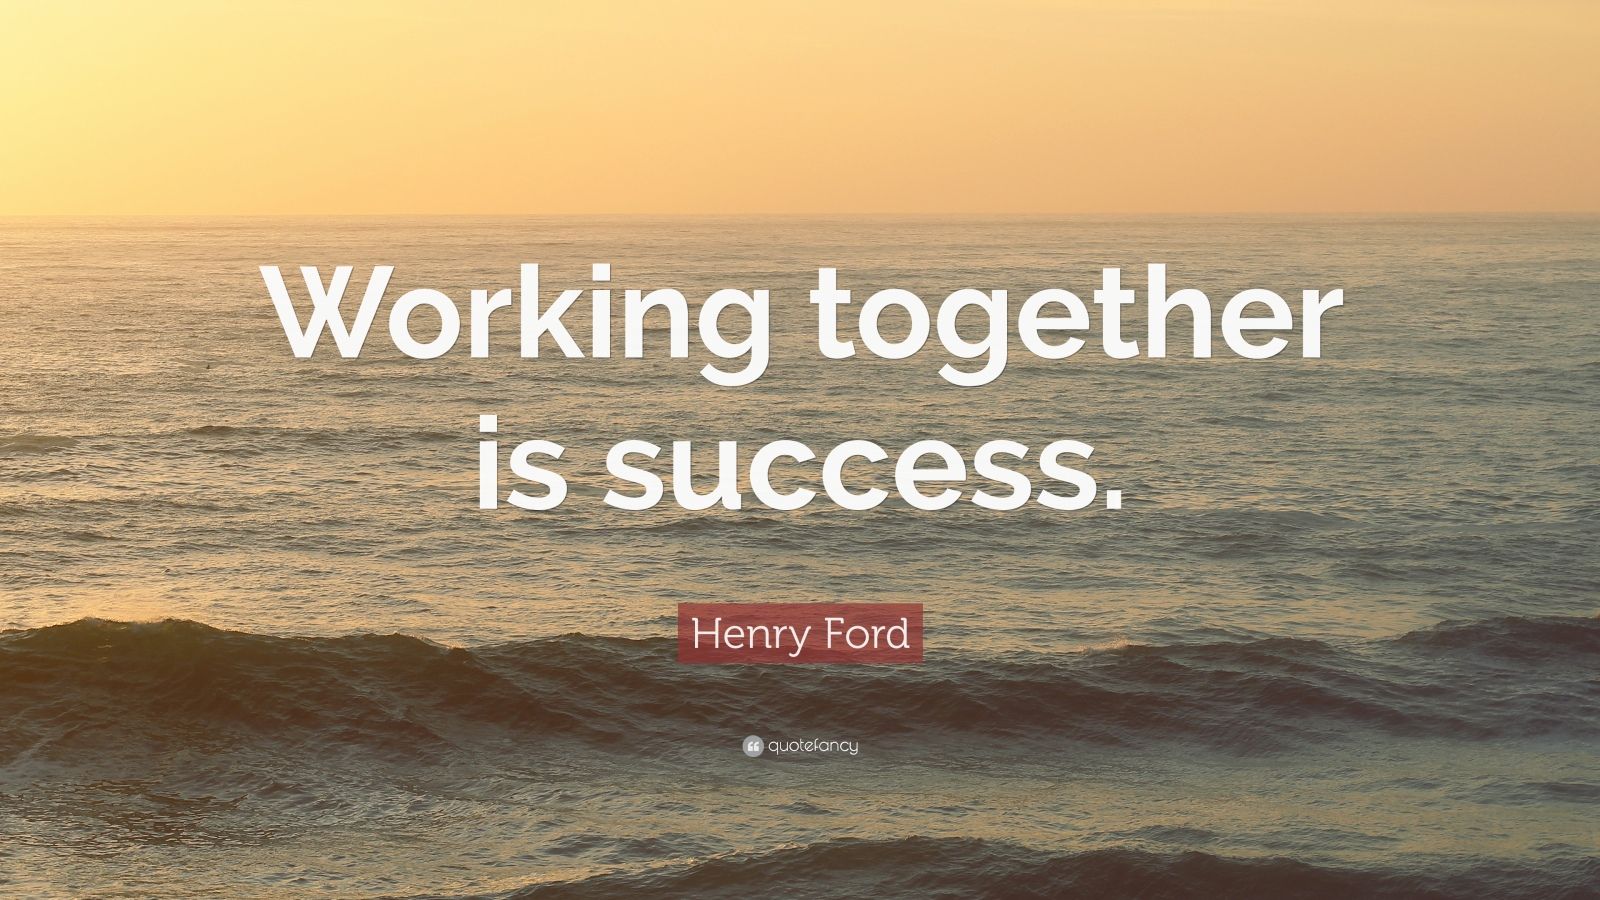 Henry Ford Quote: “Working together is success.” (12 wallpapers